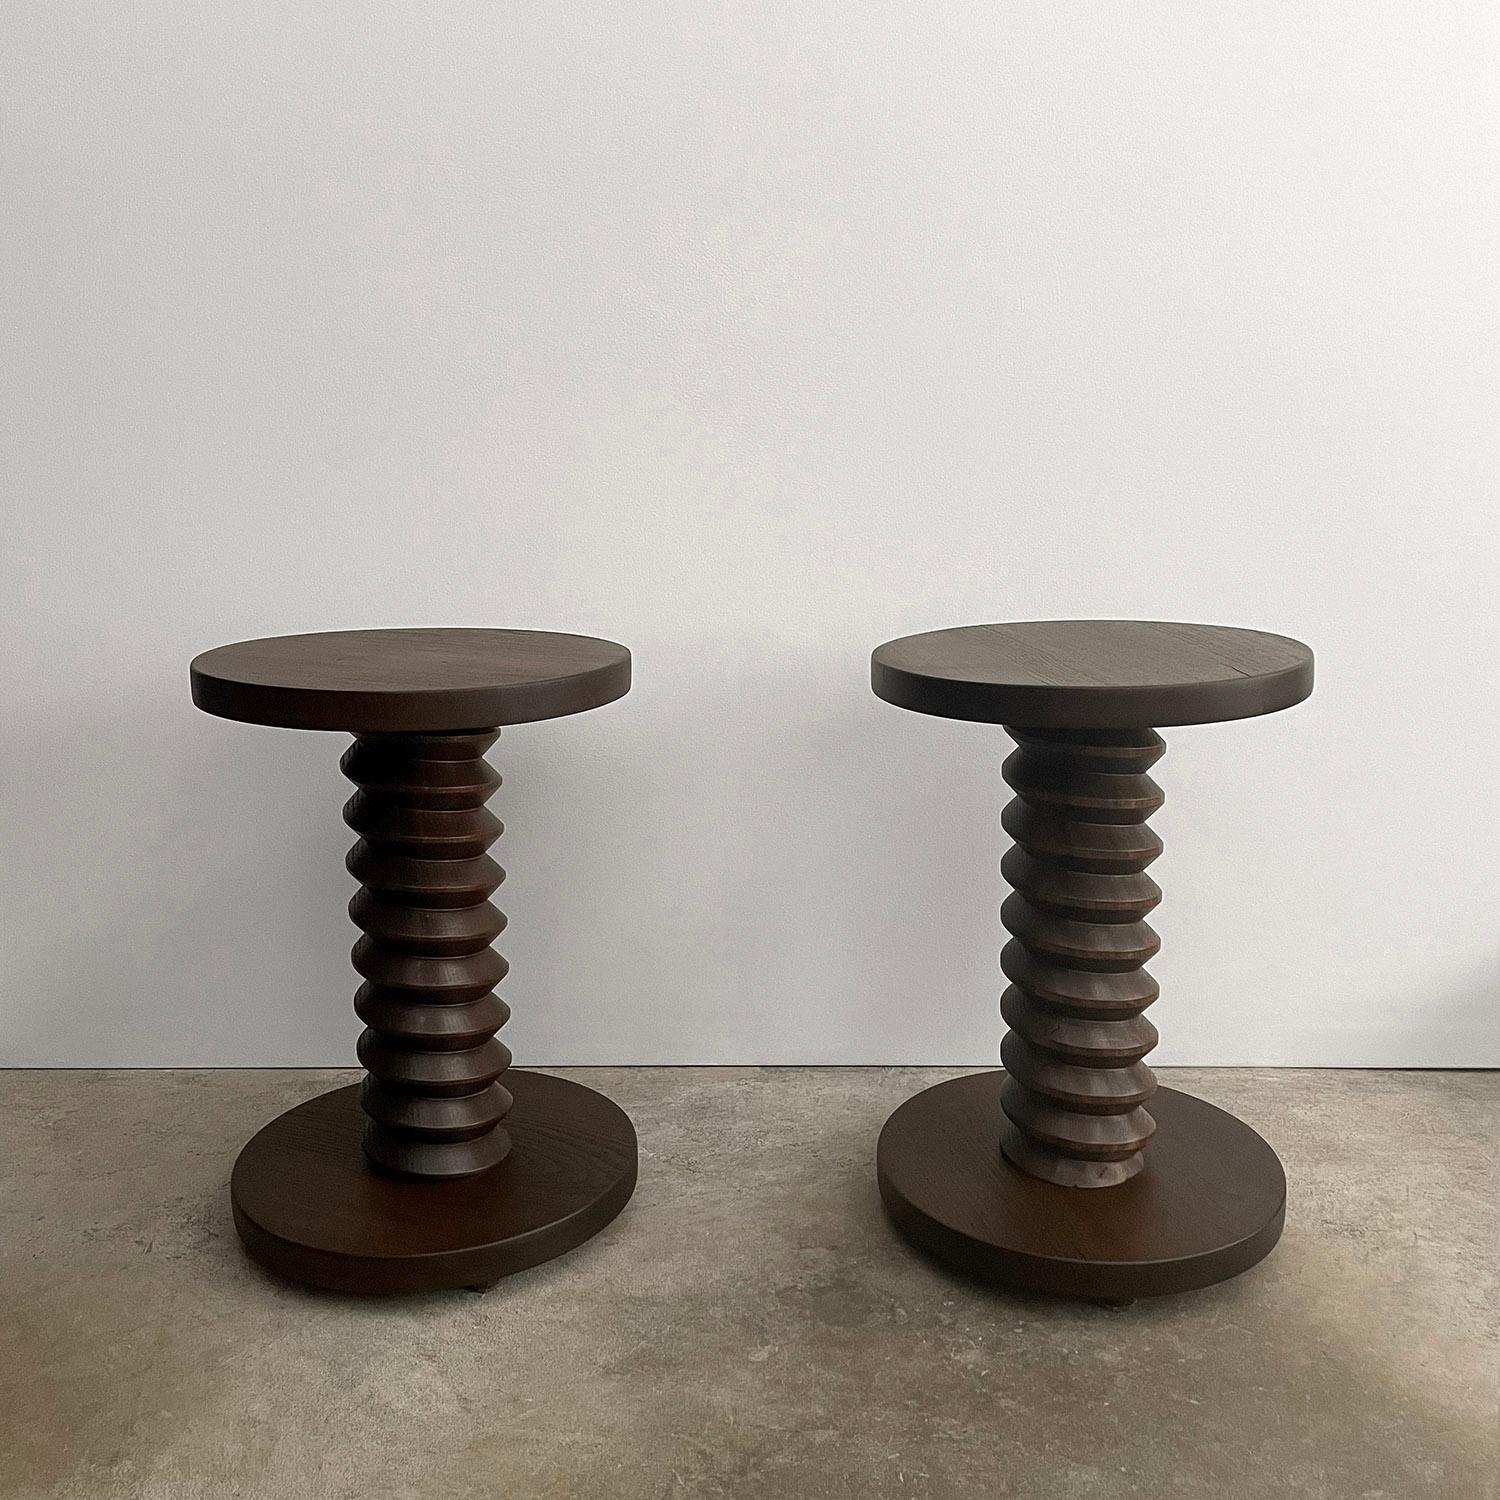 Pair of French Oak Corkscrew End Tables
France, mid century 
Hand crafted artisanal piece
Impressive slab wood tabletop is over 1” thick
Beautifully sculpted turned wood corkscrew pedestal
Lovely wood grain detail
Natural color variations throughout